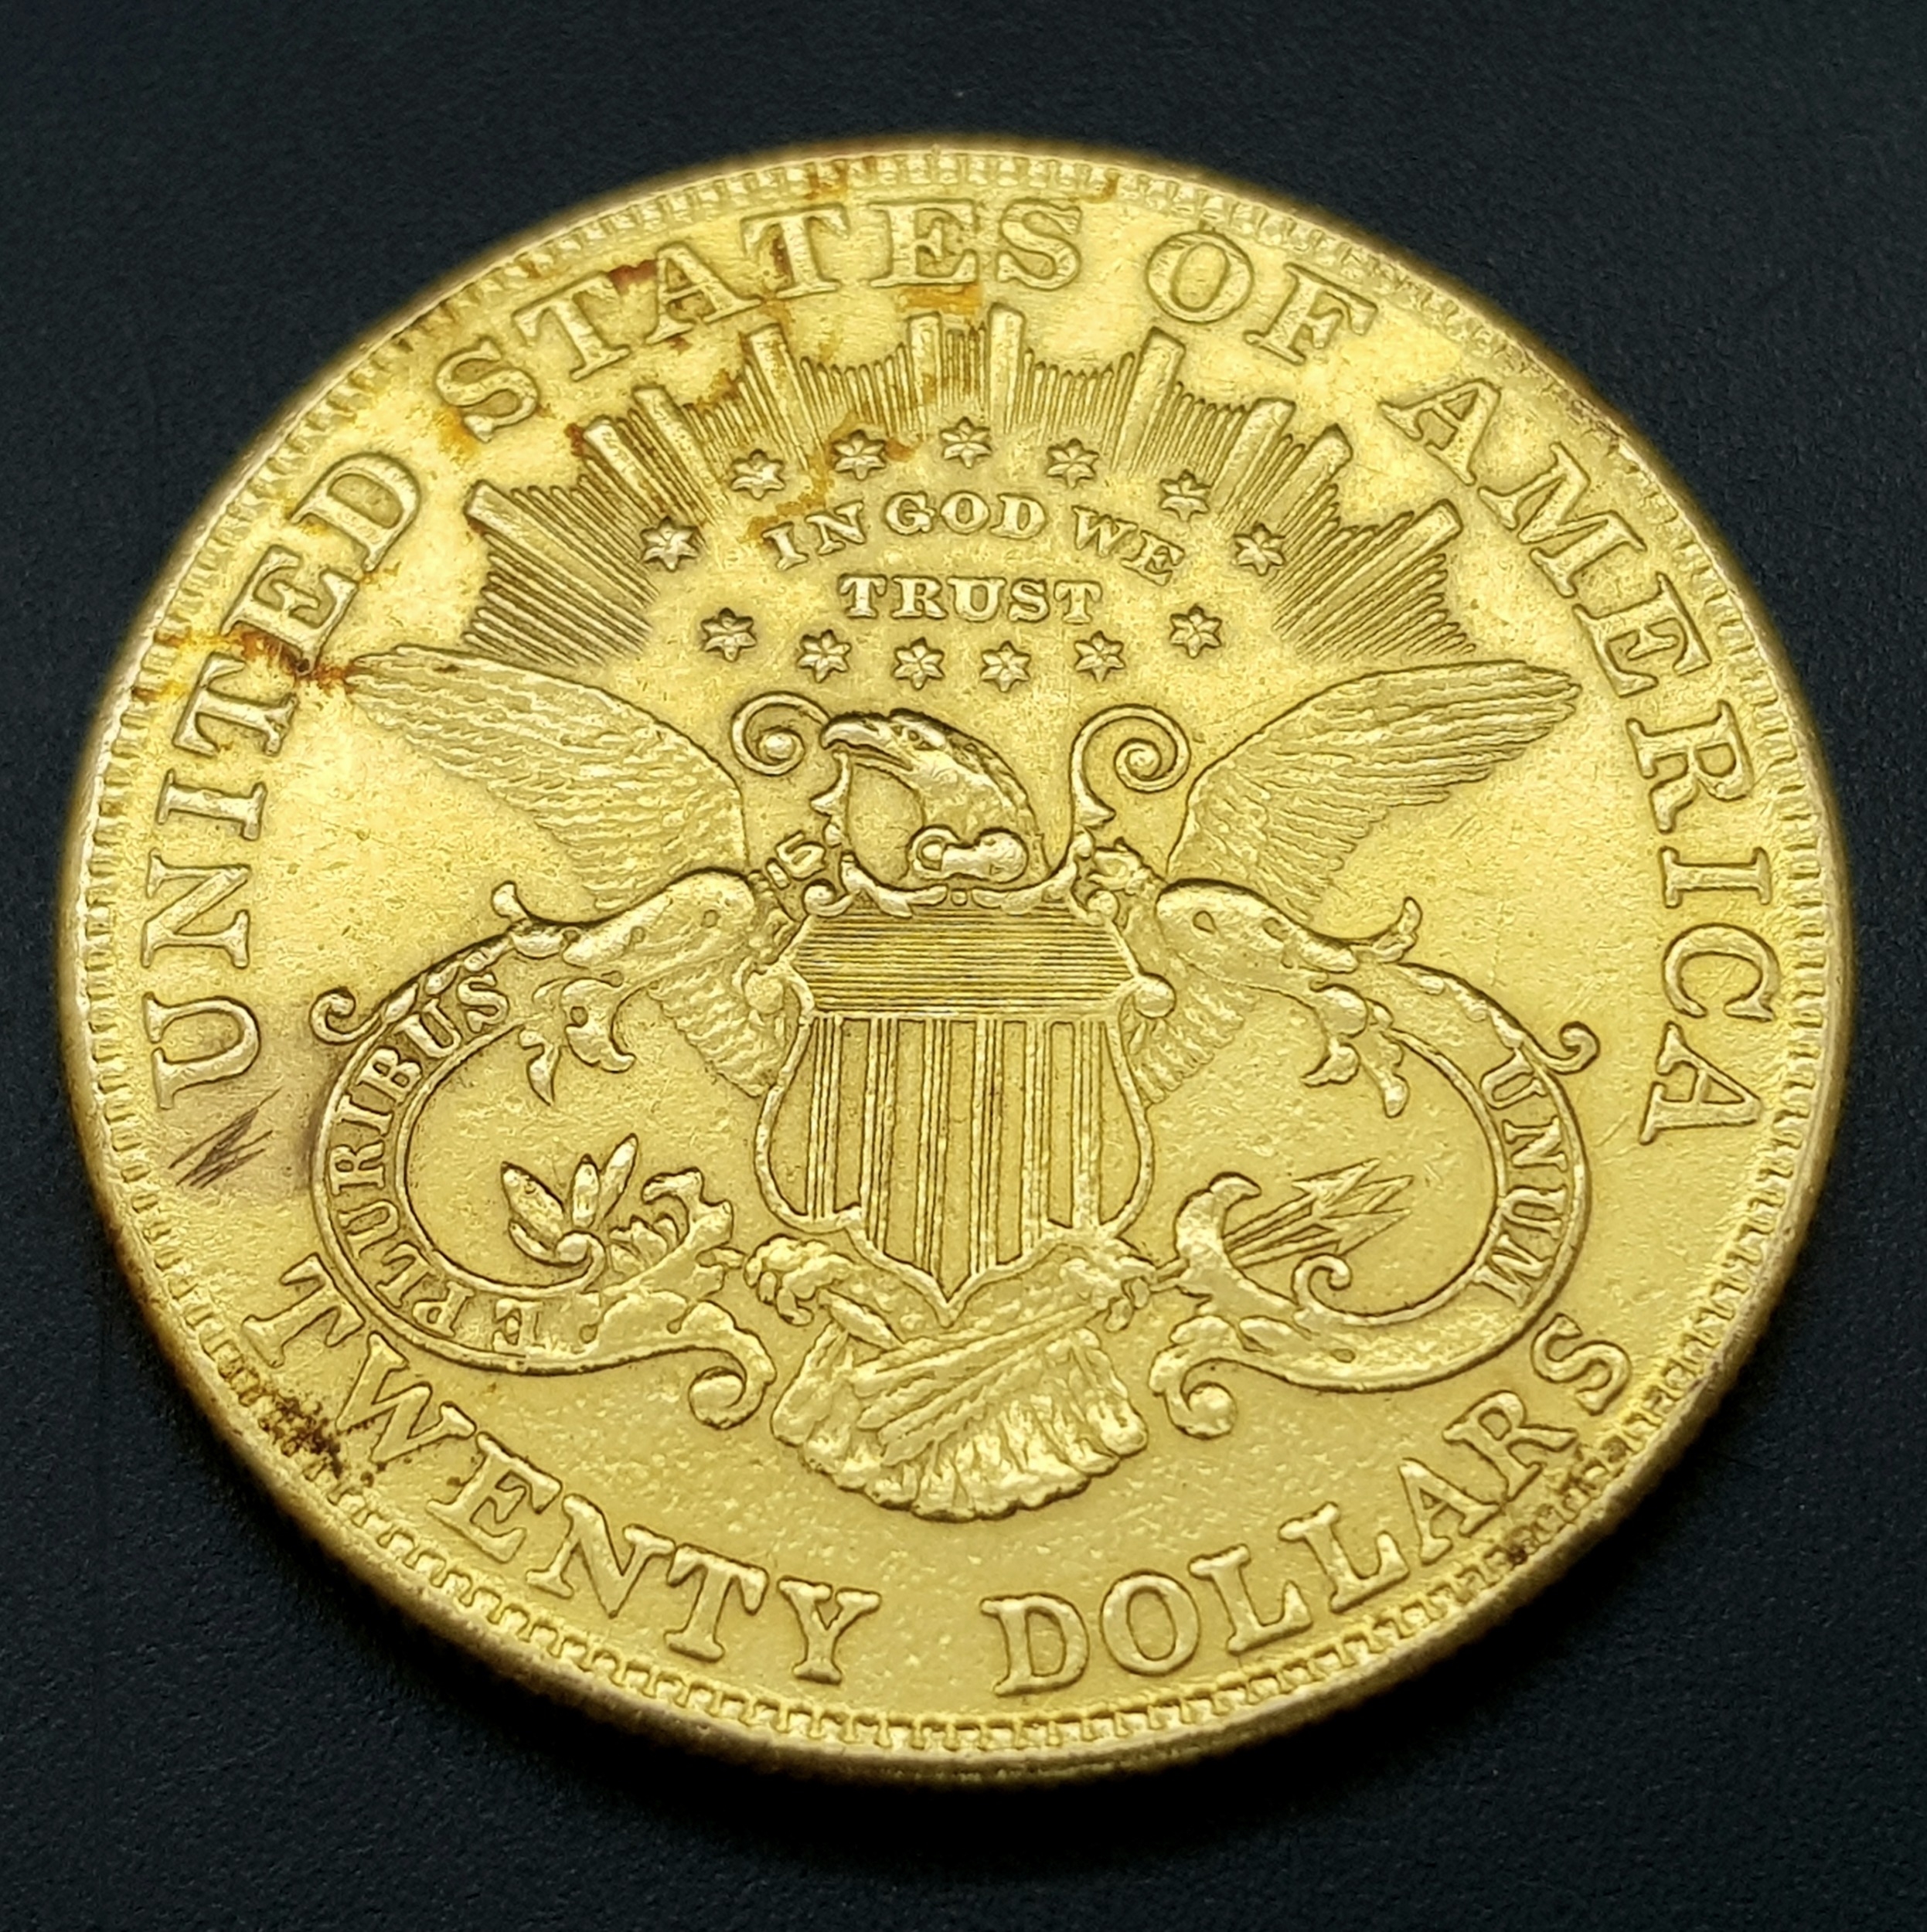 A $20 GOLD LIBERTY COIN DATED 1907 AND WEIGHING 33.43gms THIS COIN IS IN VERY GOOD CONDITION - Image 4 of 8